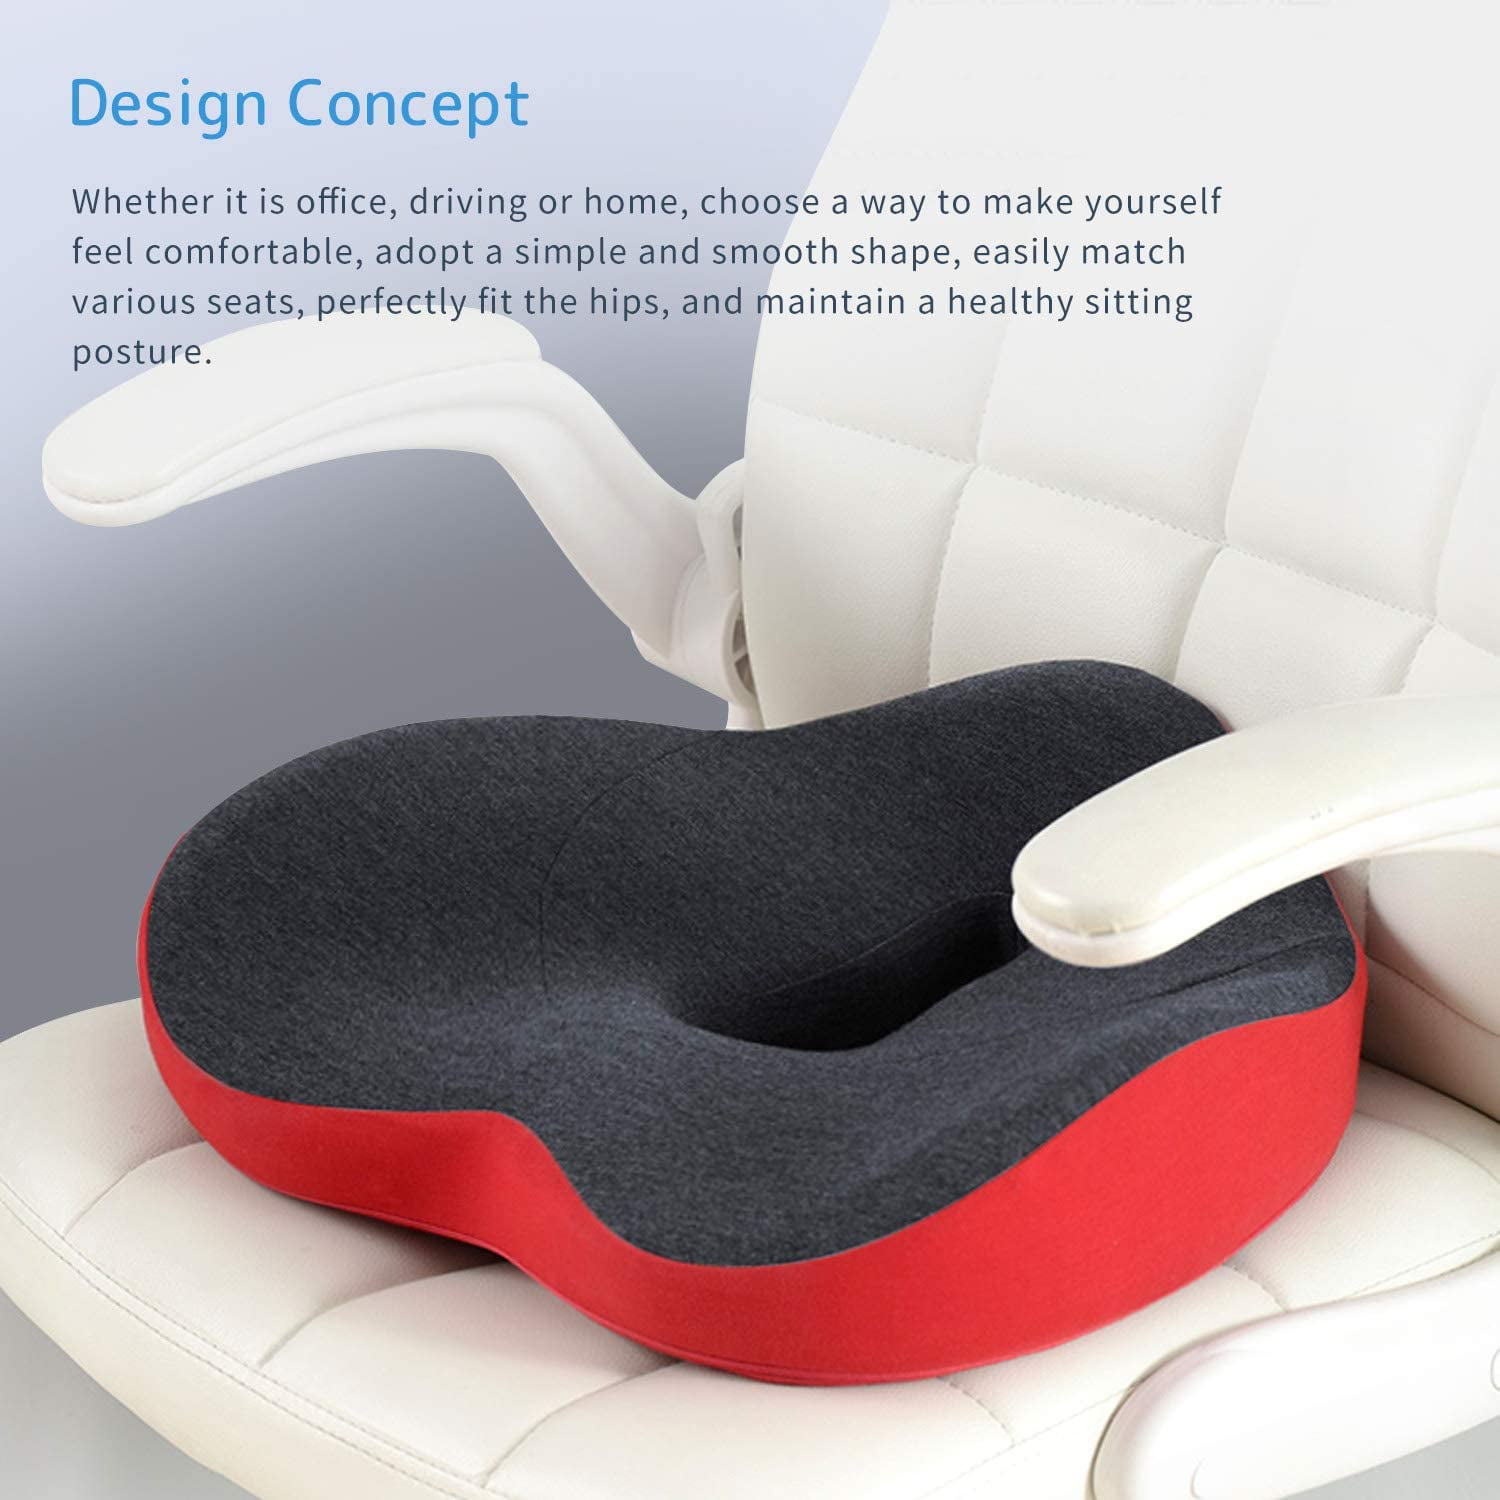 Grey+red 100% Memory Foam Seat Cushion for Office Chair-Coccyx seat Cushion-Orthopedic Seat Cushion for Tailbone Pain Lower Back Pain Relief 